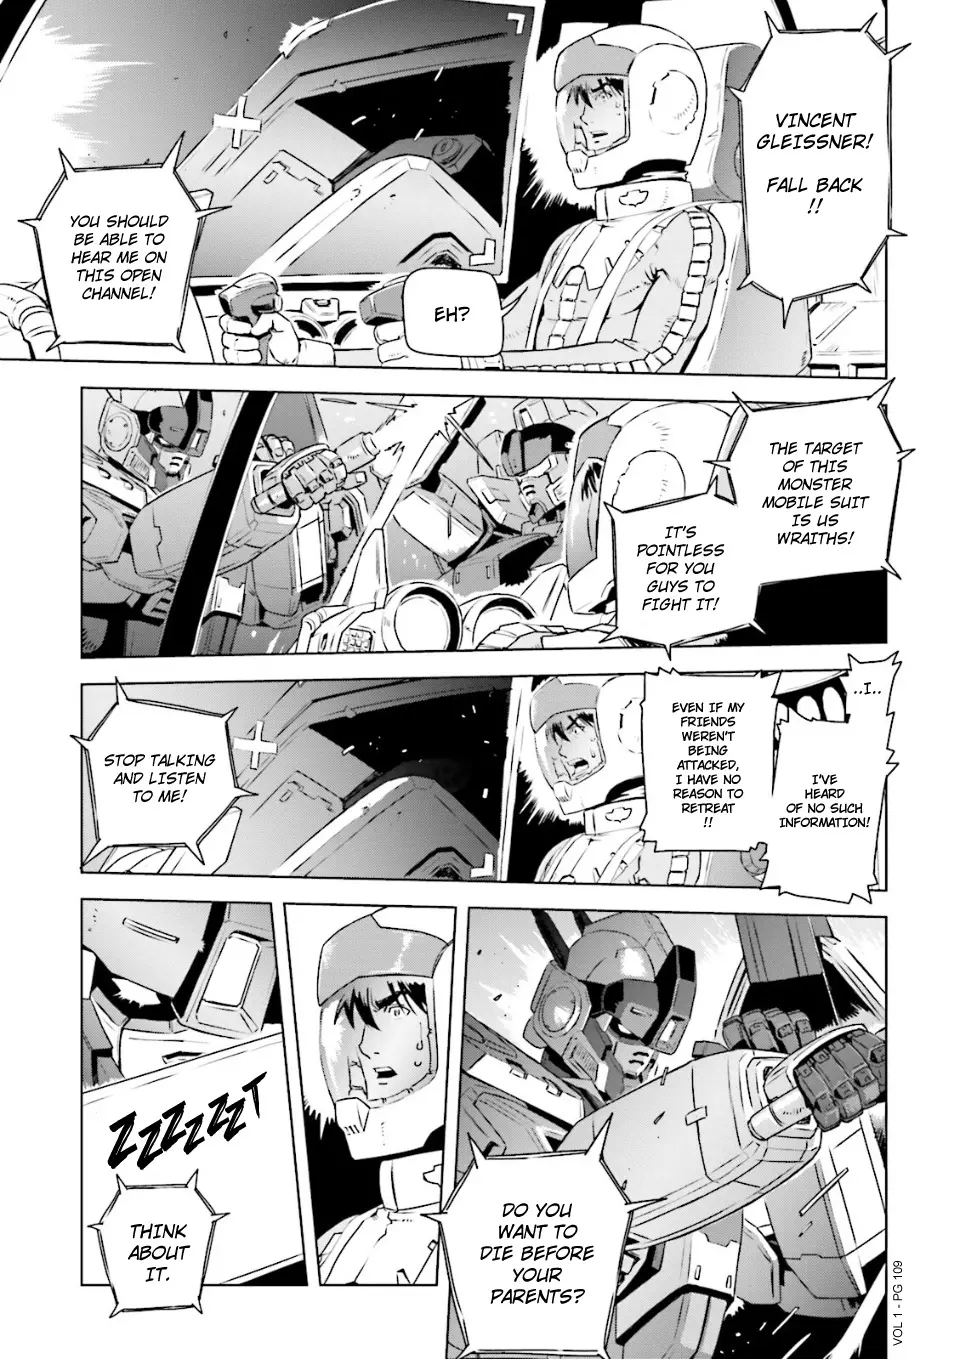 Mobile Suit Gundam Side Story - Missing Link - 4 page 17-e47ed249